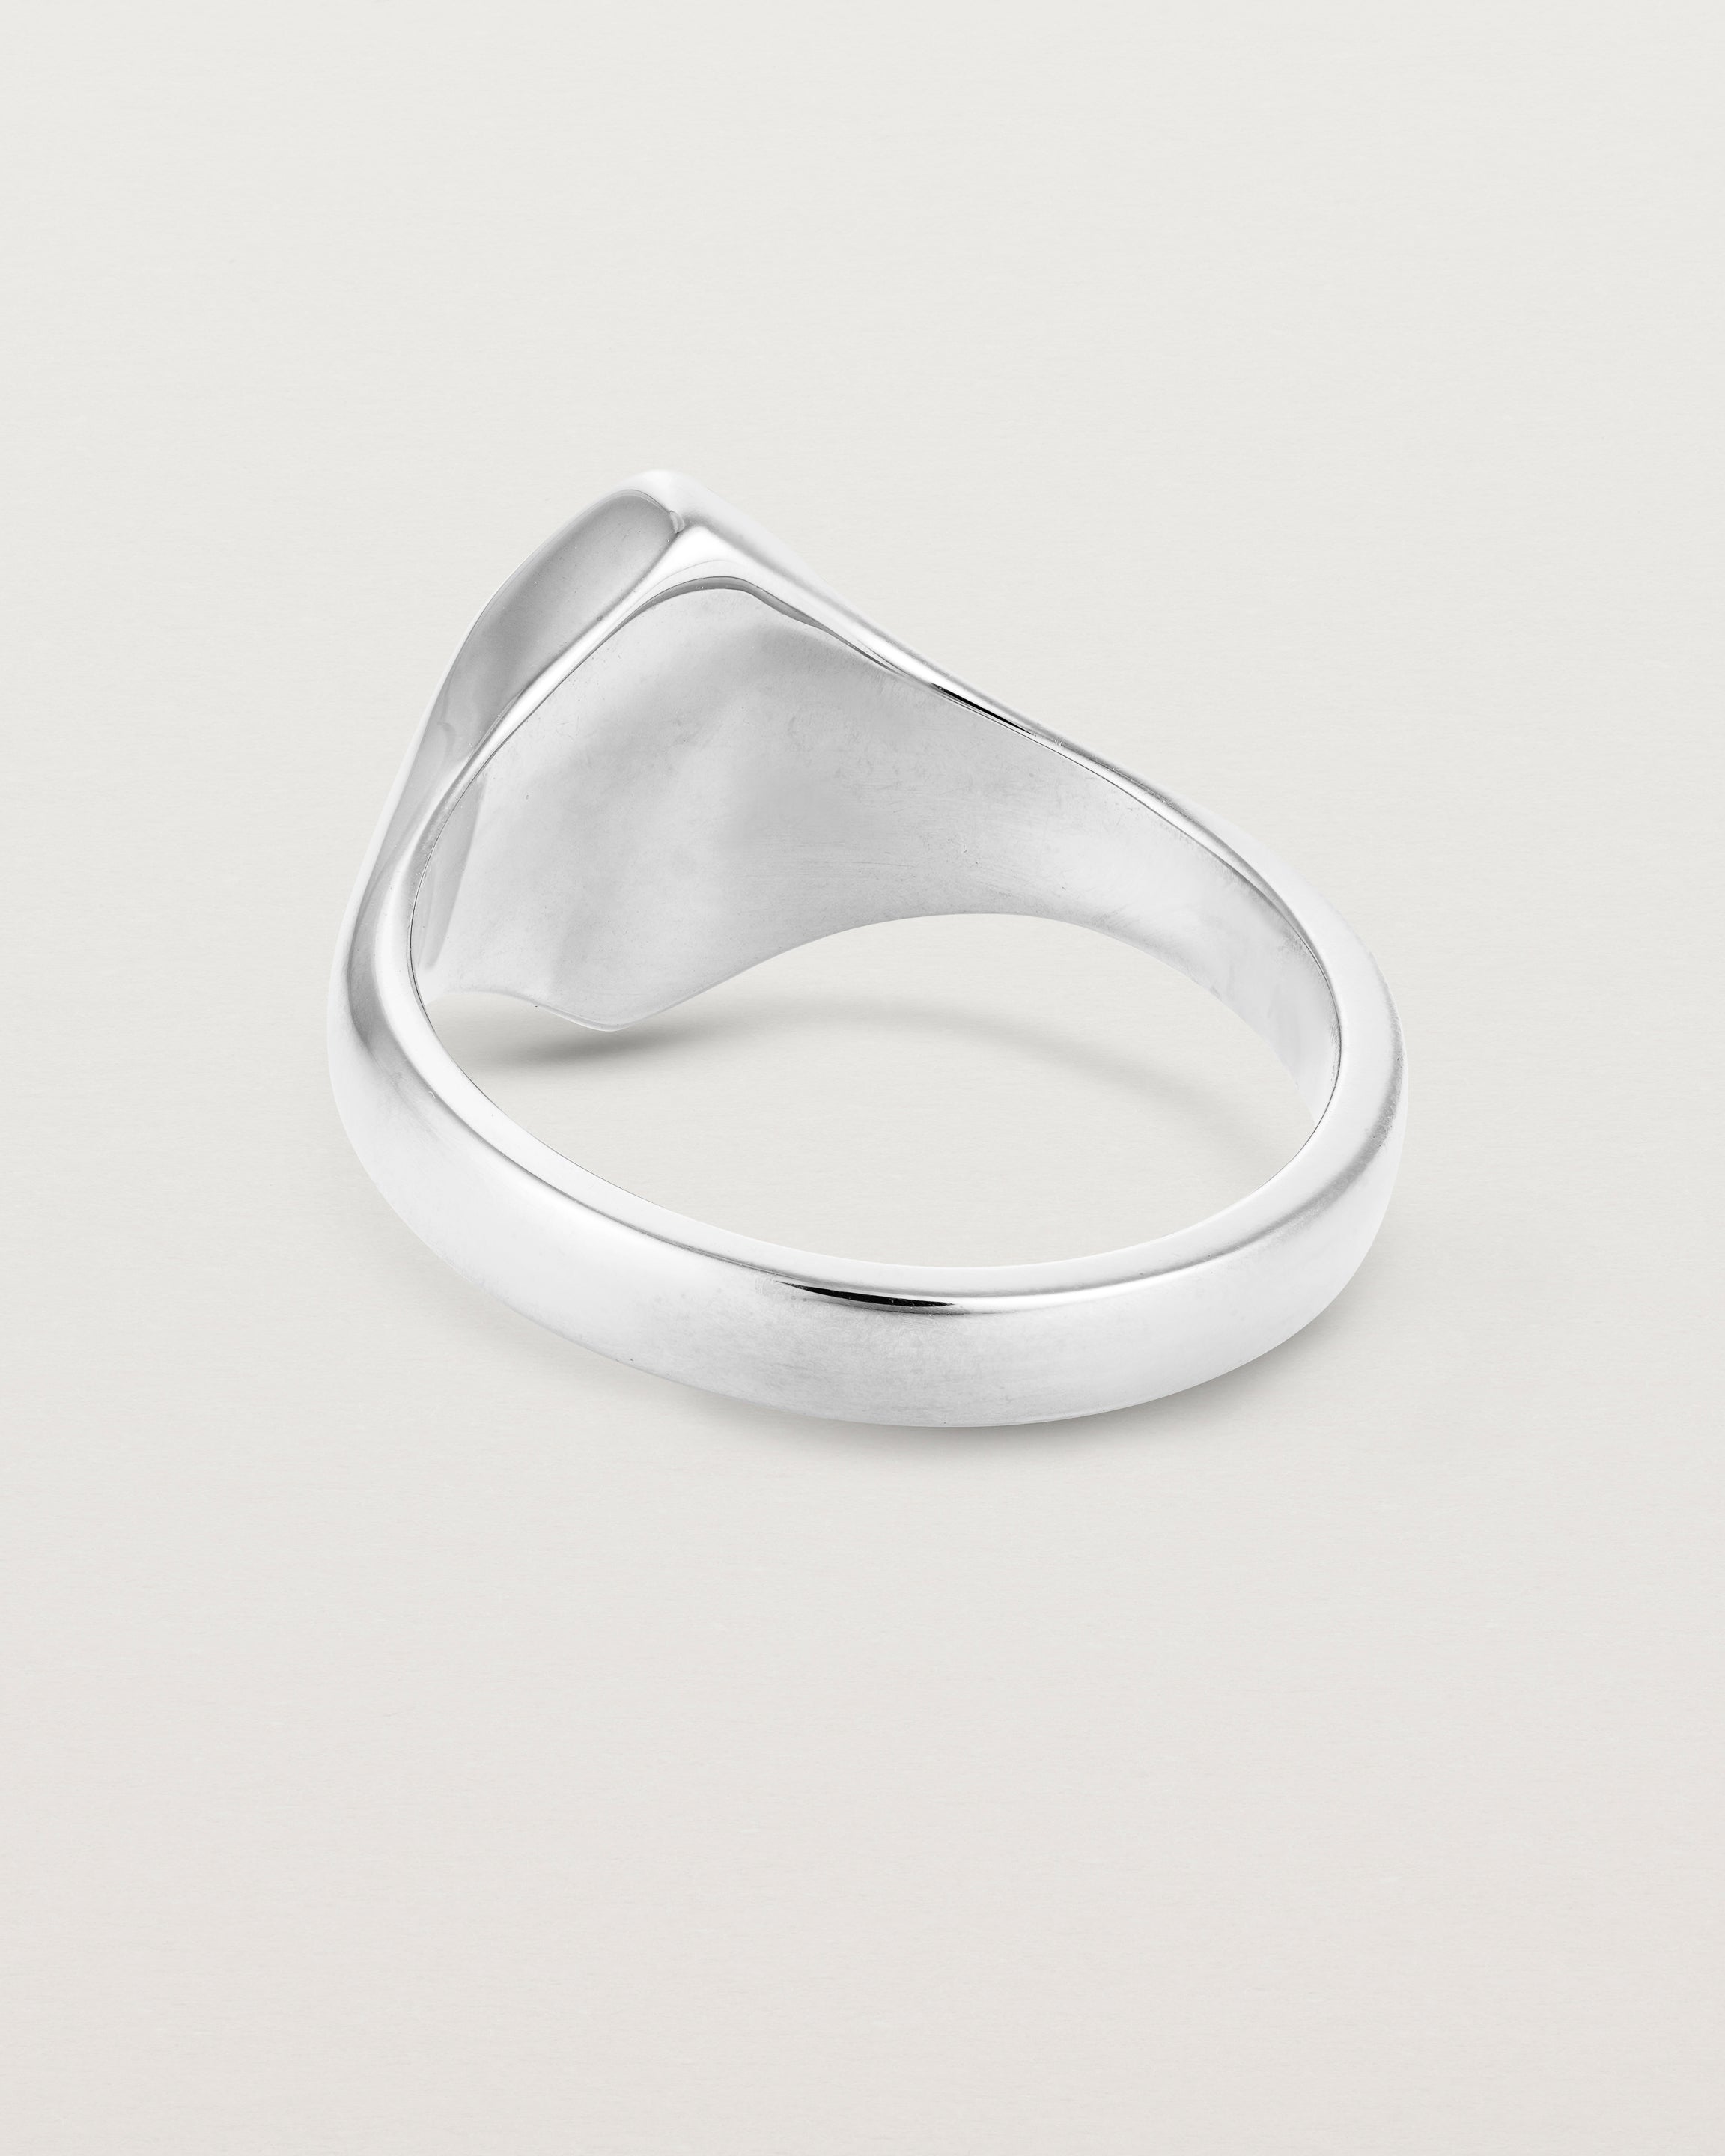 Back view of the Willow Signet Ring in sterling silver.